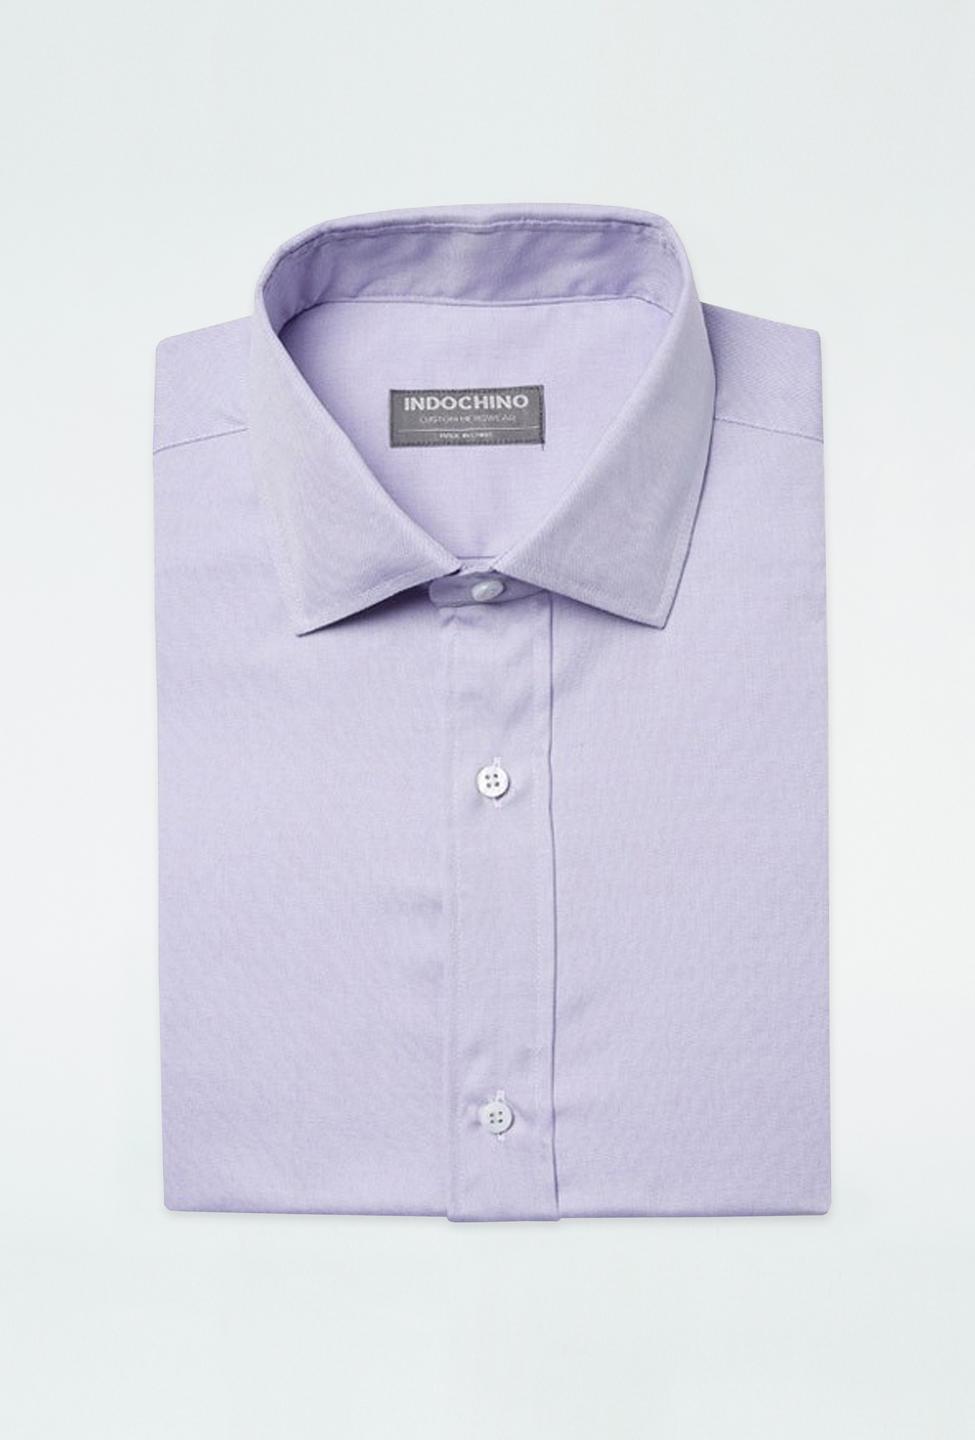 Purple shirt - Helmsley Solid Design from Premium Indochino Collection